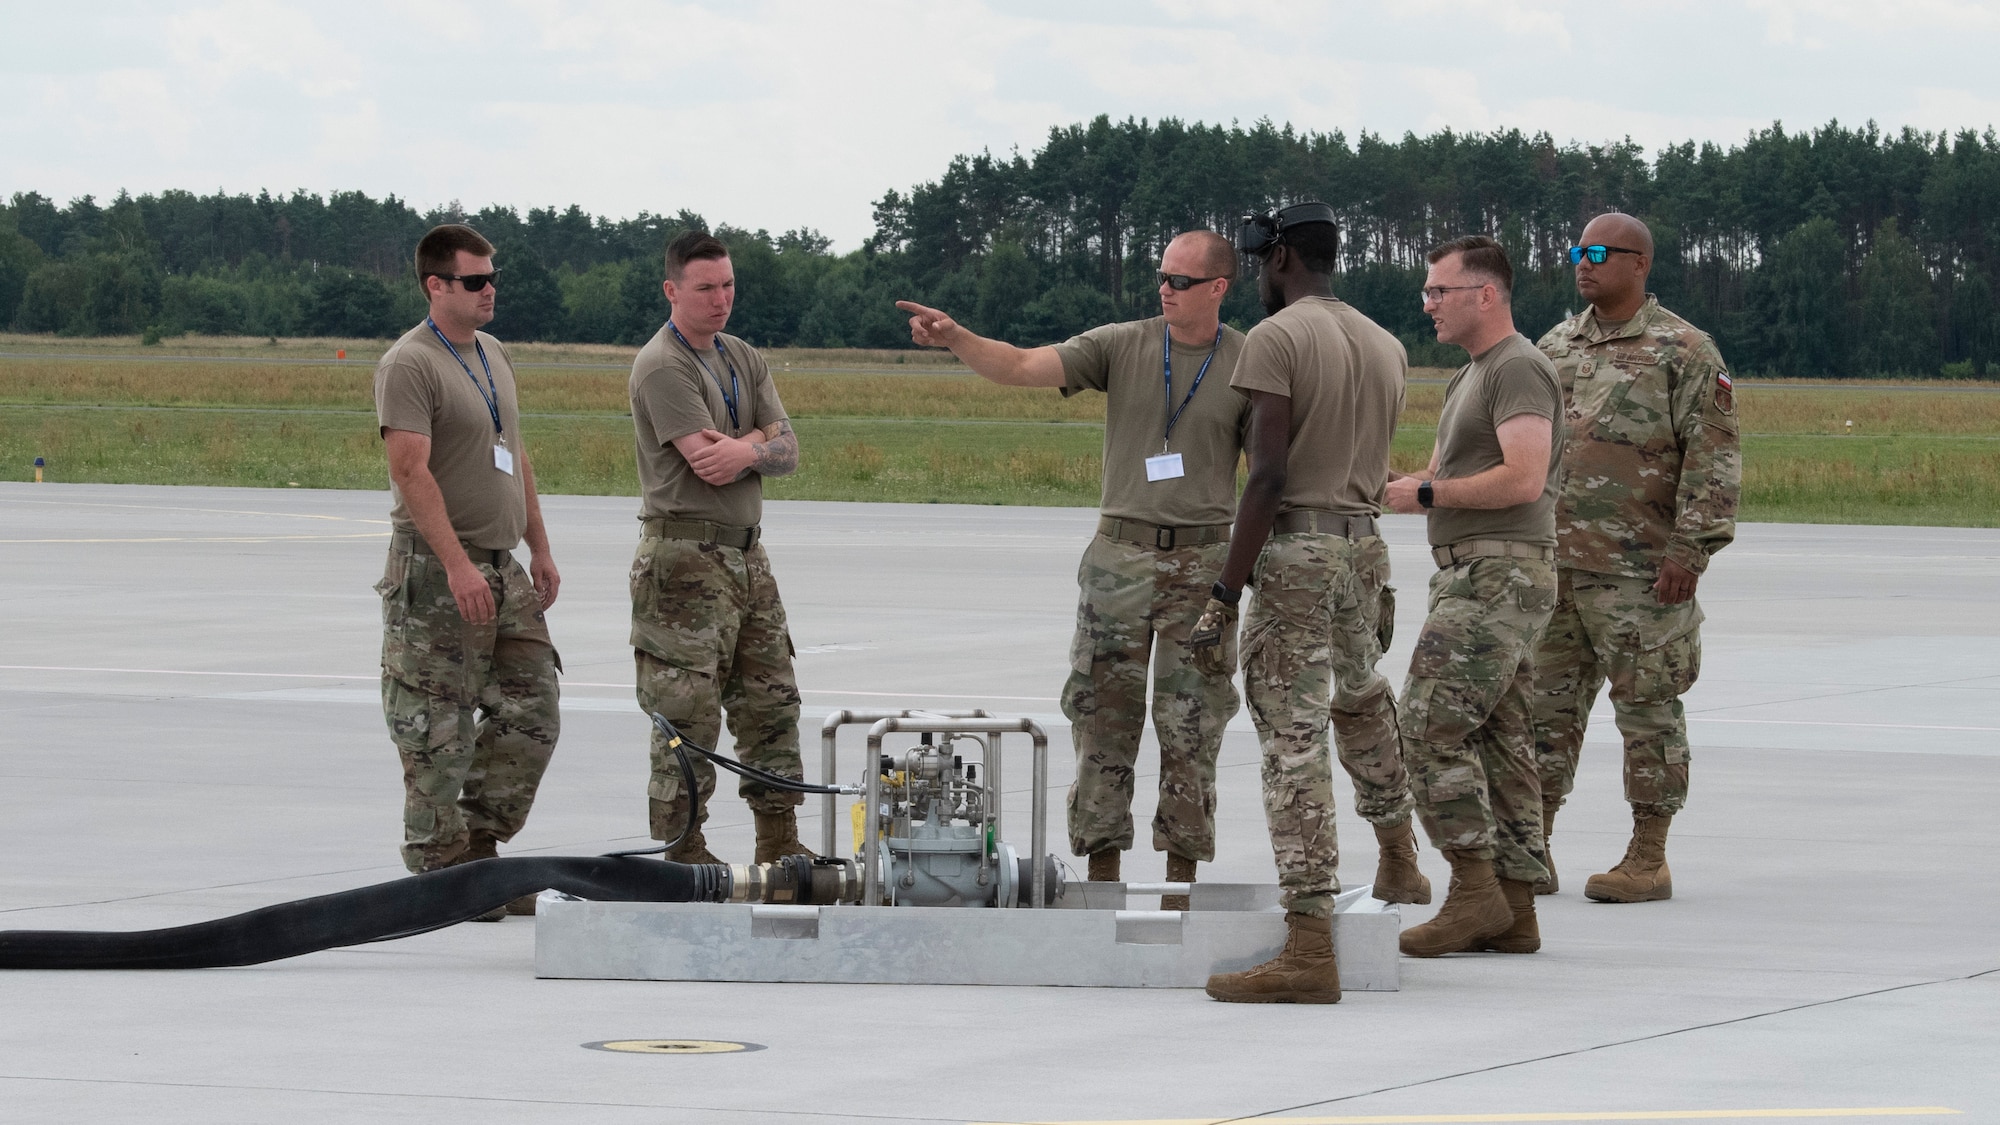 U.S. Air Force Airmen from the 480th Expeditionary Fighter Squadron and the 126th Air Refueling Wing, Scott Air Force Base, Ill., gather around the Versatile Integrating Partner Equipment Refueling Kit, or VIPER Kit, at Powidz Air Base, Poland, Aug. 10, 2021. The Airmen discussed VIPER Kit set up procedures when servicing a U.S. Air Force KC-135 Stratotanker aerial refueling aircraft. (U.S. Air Force photo by Tech. Sgt. Anthony Plyler)